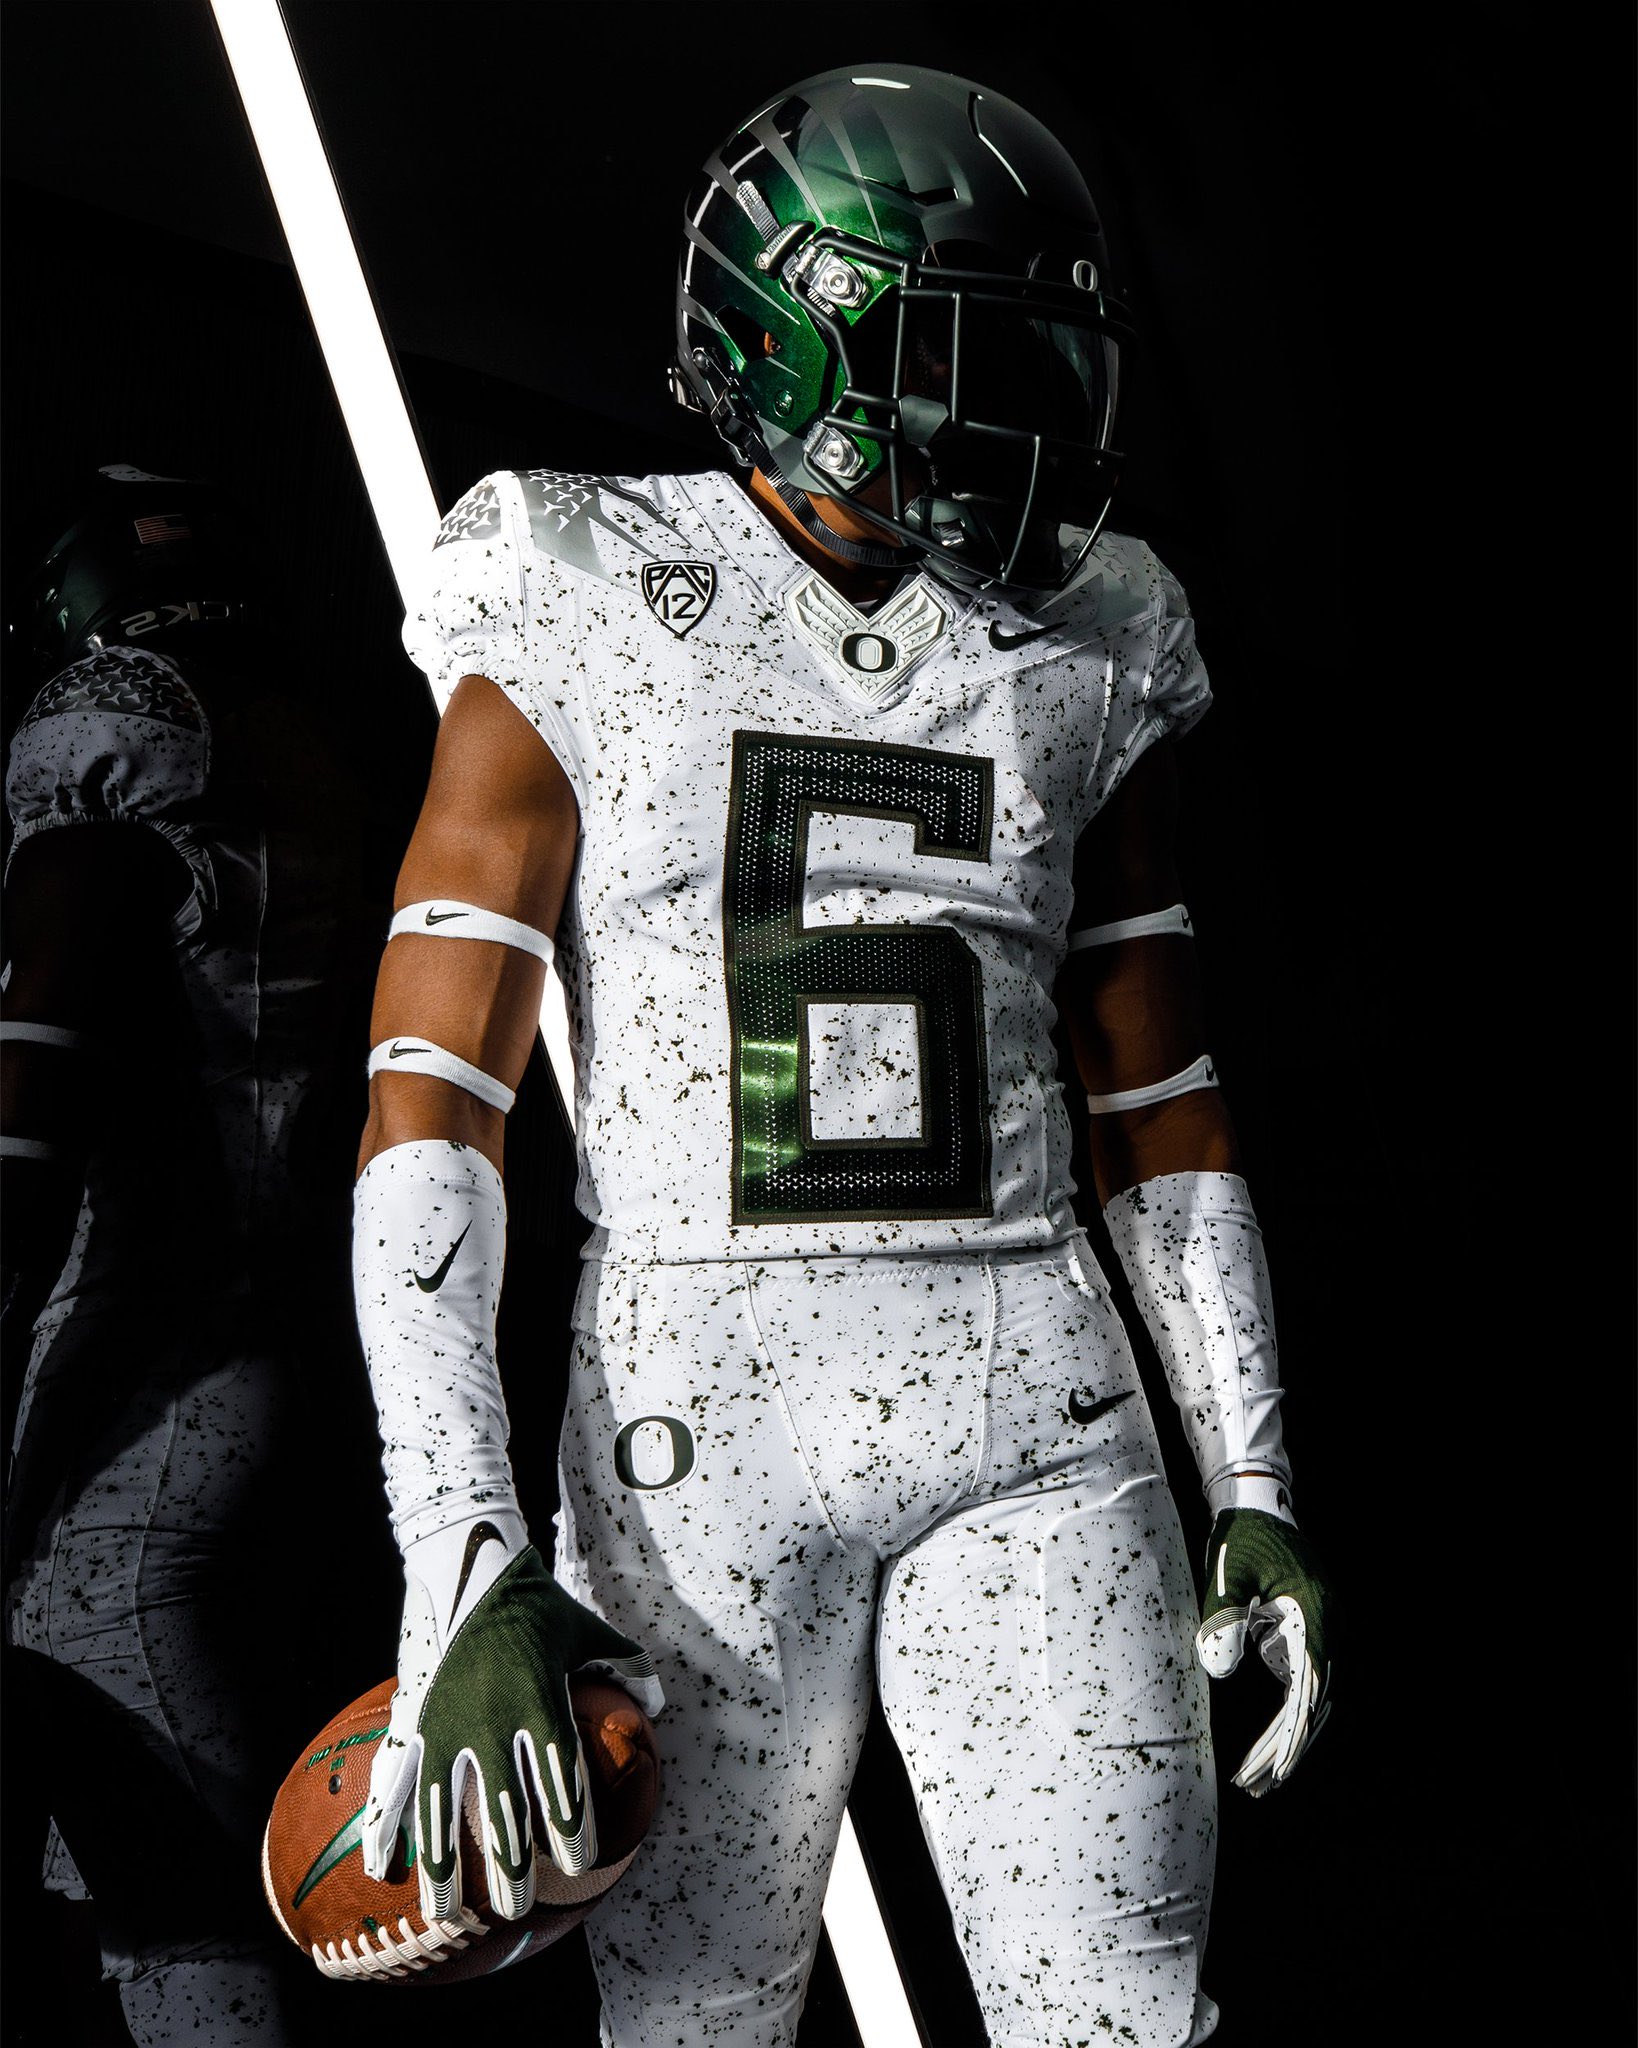 Oregon's new uniforms are fresh, but have hilarious numbers 